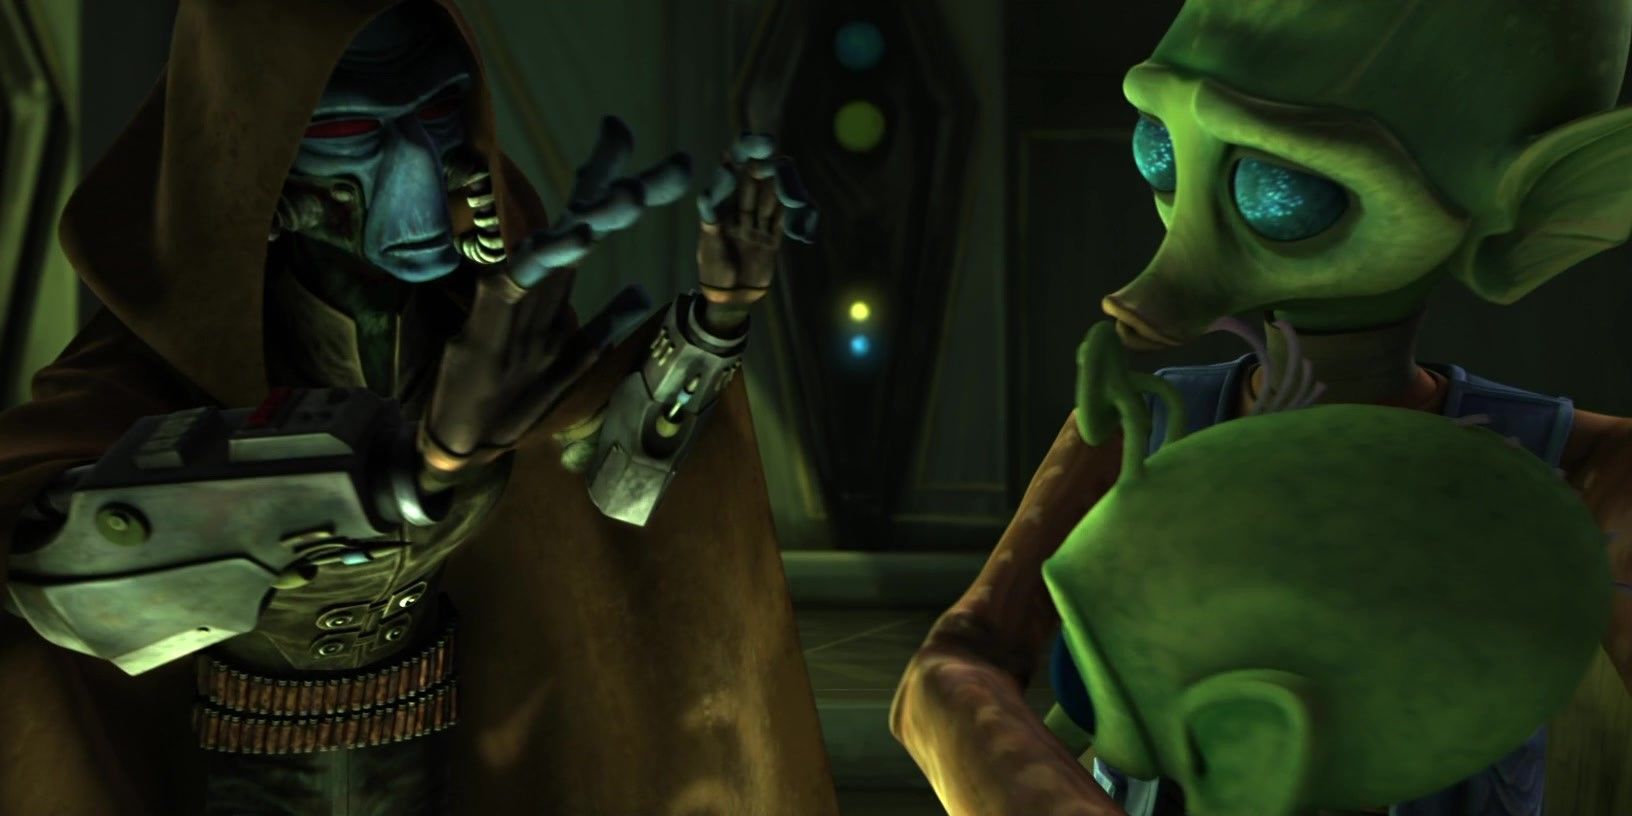 Cad Bane tries to trick a mother into surrendering her Force-sensitive child to him by posing as a Jedi in Star Wars: the Clone Wars season 2 episode 3